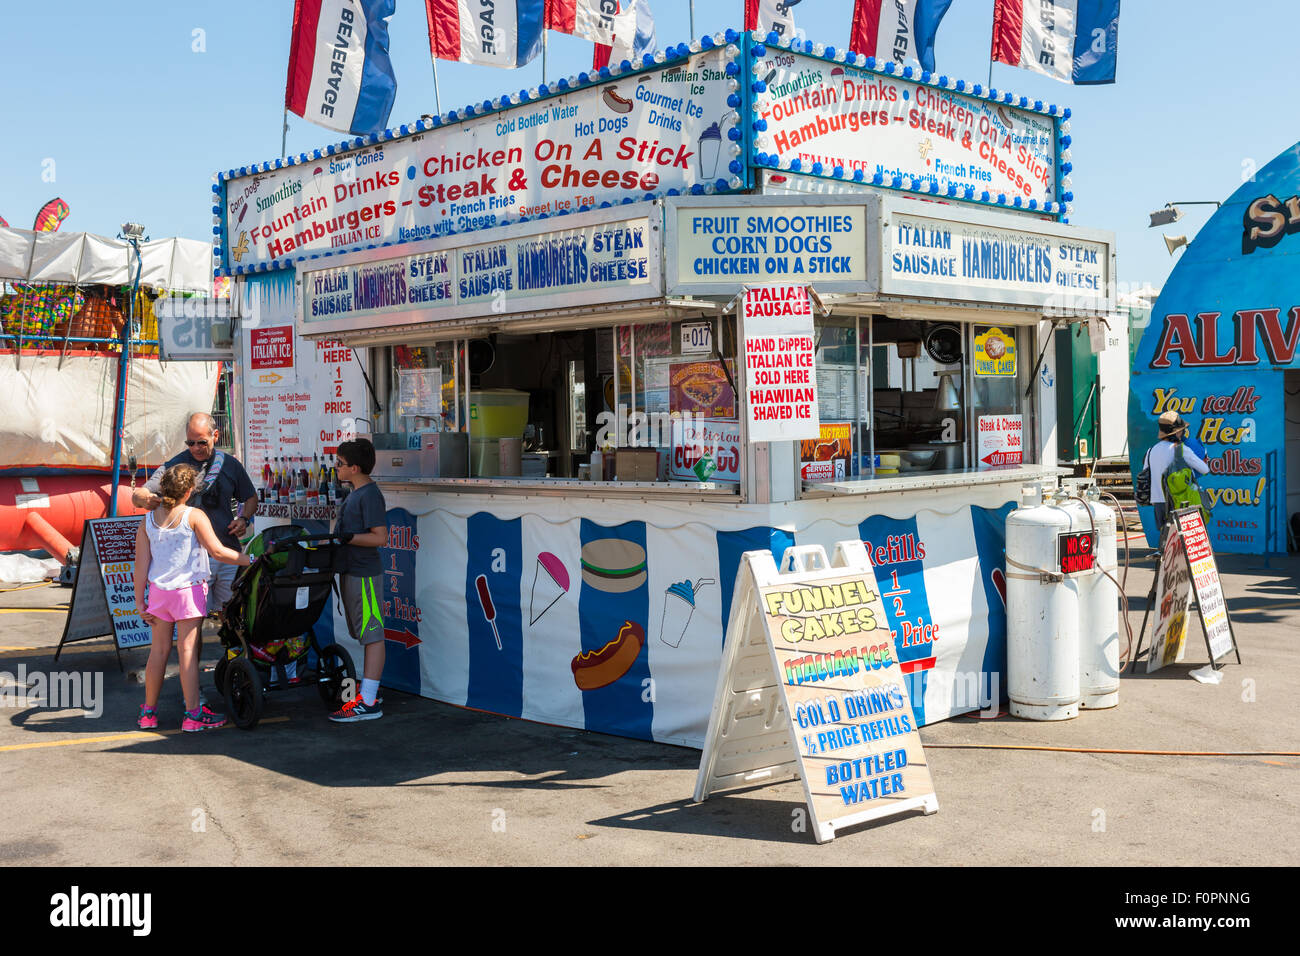 A family stops at a food concession selling various snacks at the Ohio State Fair in Columbus, Ohio. Stock Photo